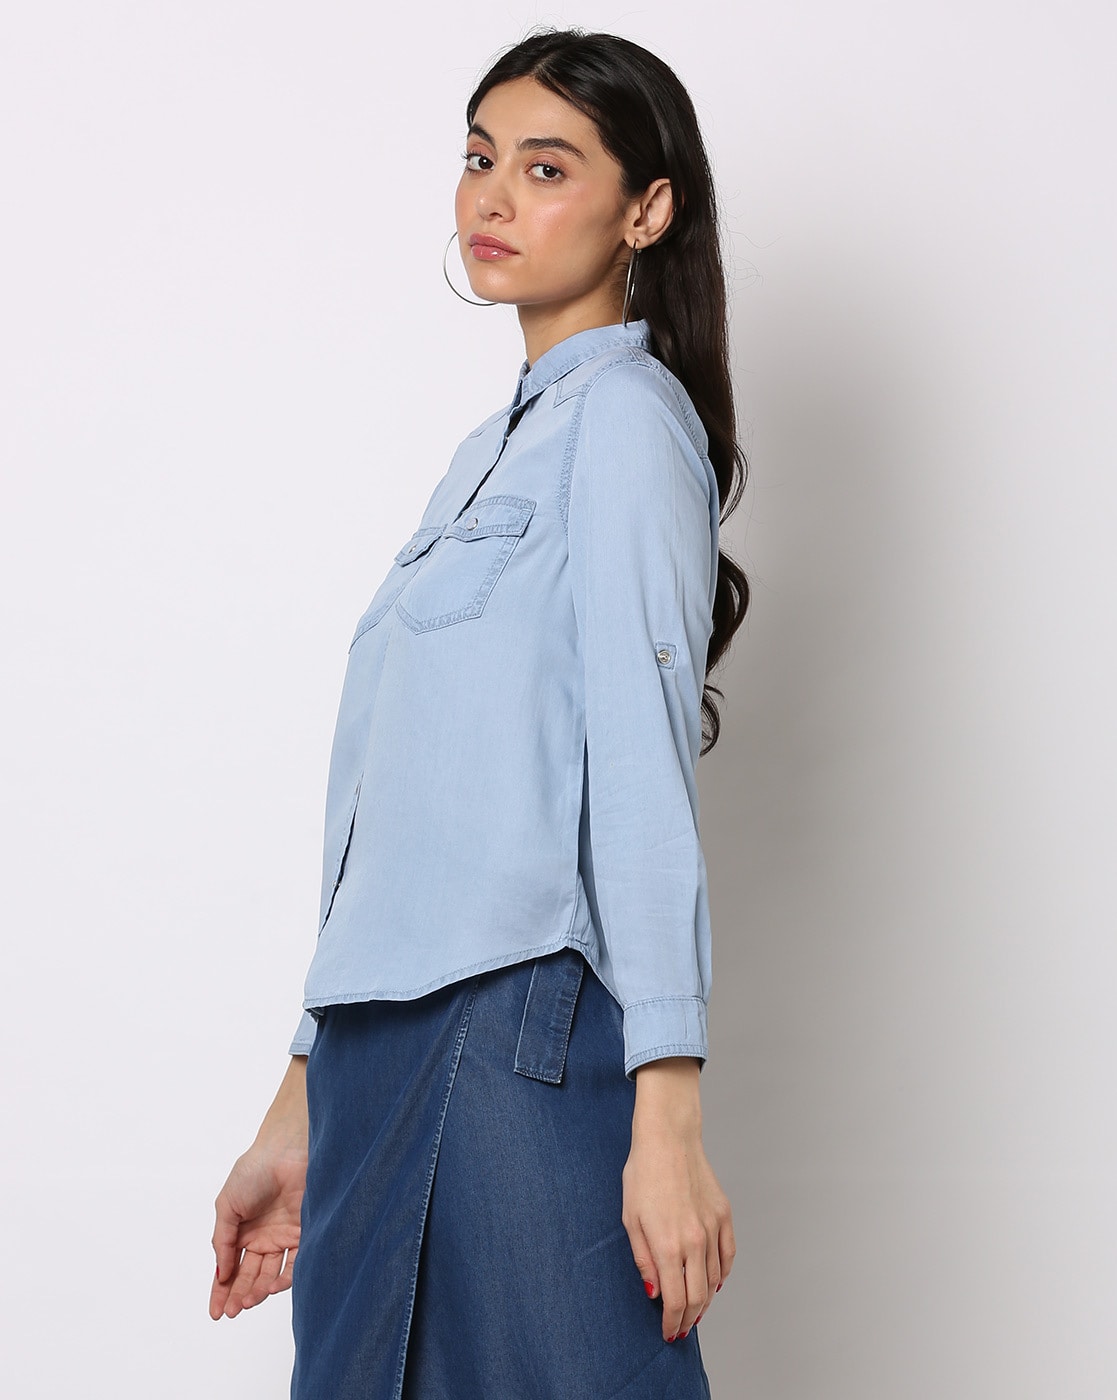 Buy Shirts For Women At Lowest Prices Online In India | Tata CLiQ